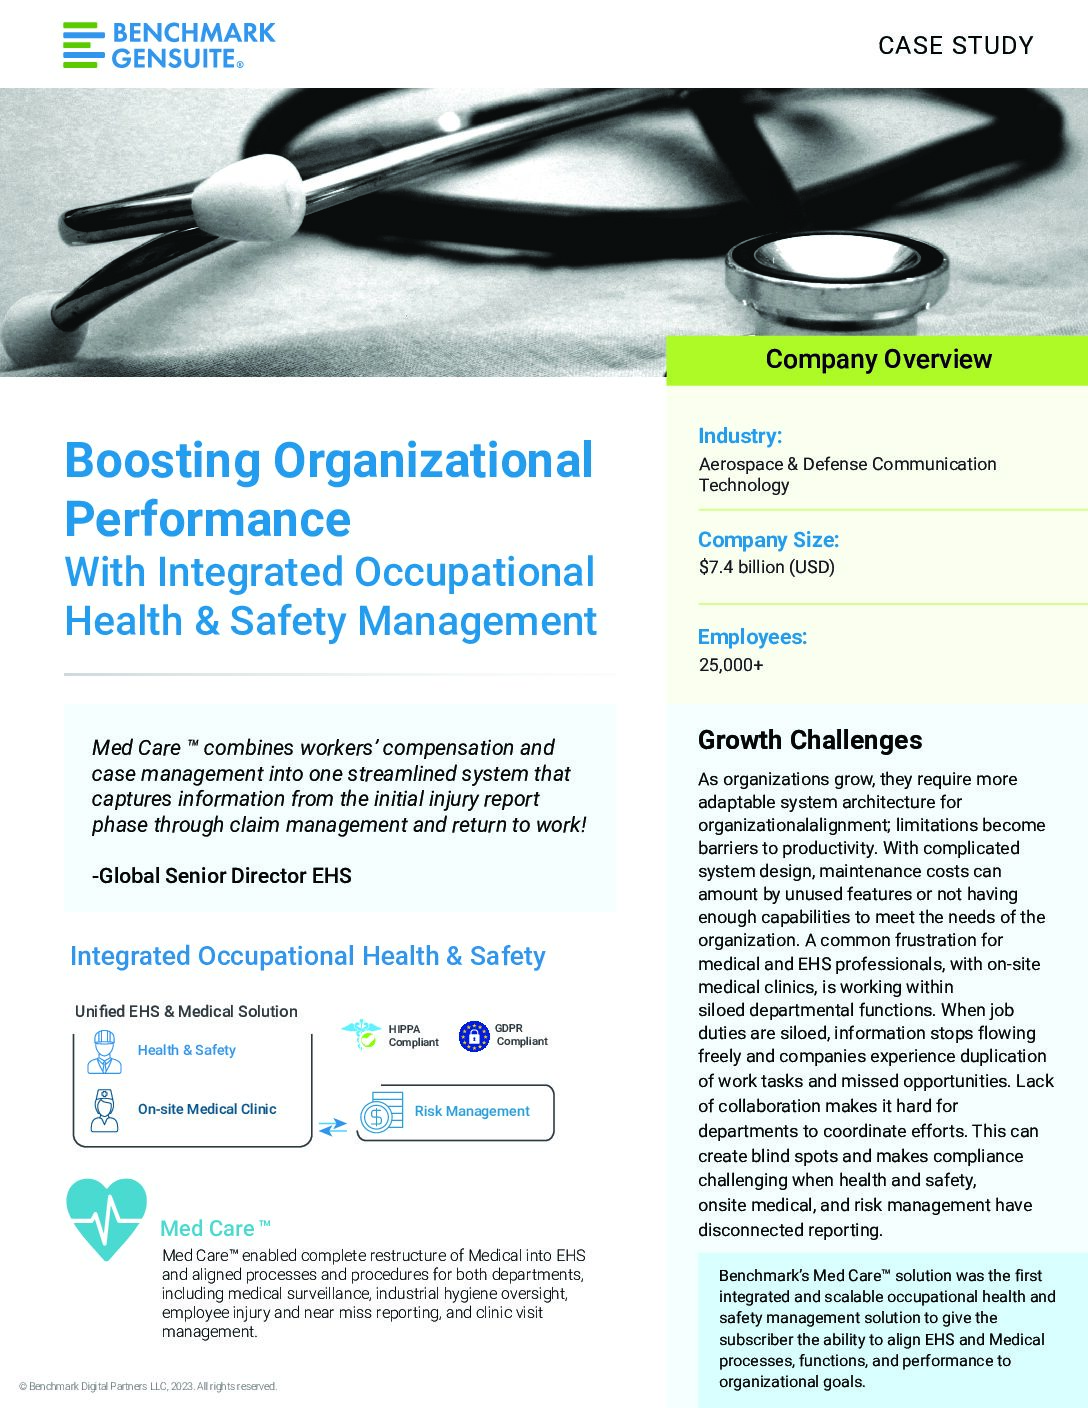 Boosting Organizational Performance With Integrated Occupational Health & Safety Management